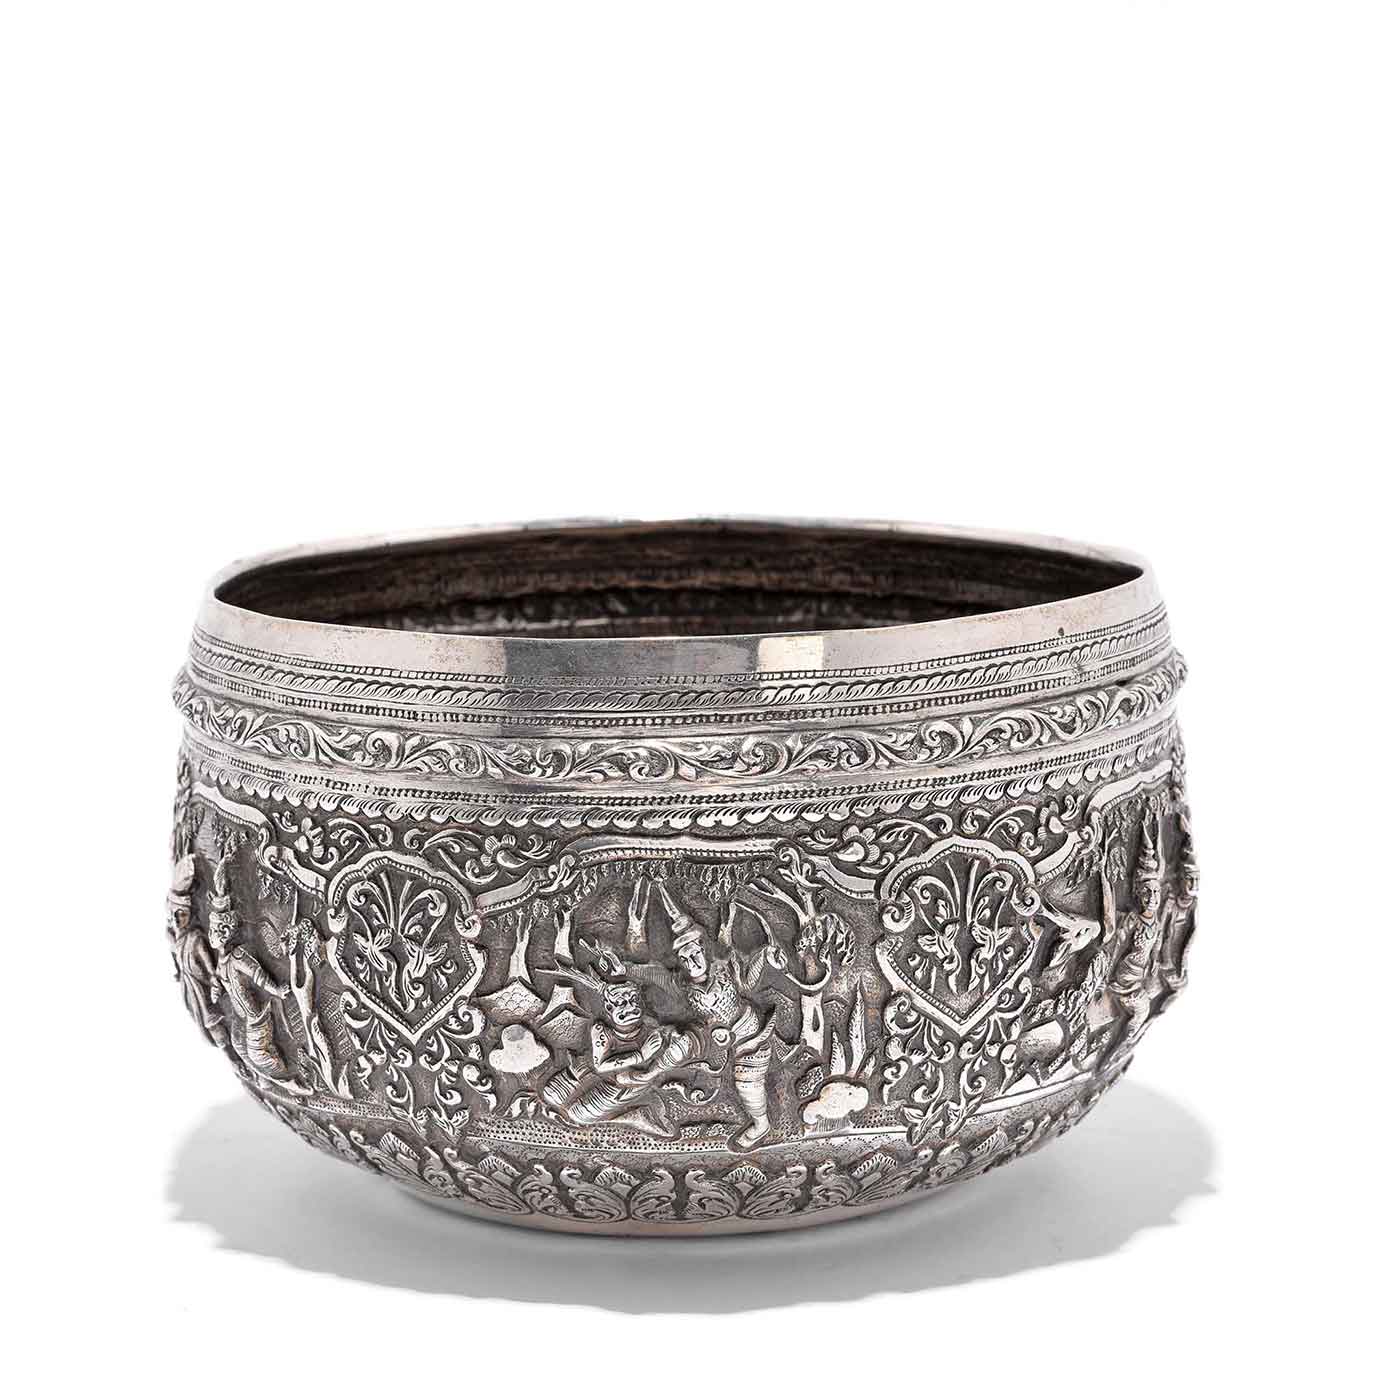 Repousse Silver Bowl from Burma - 19thC | Indigo Antiques